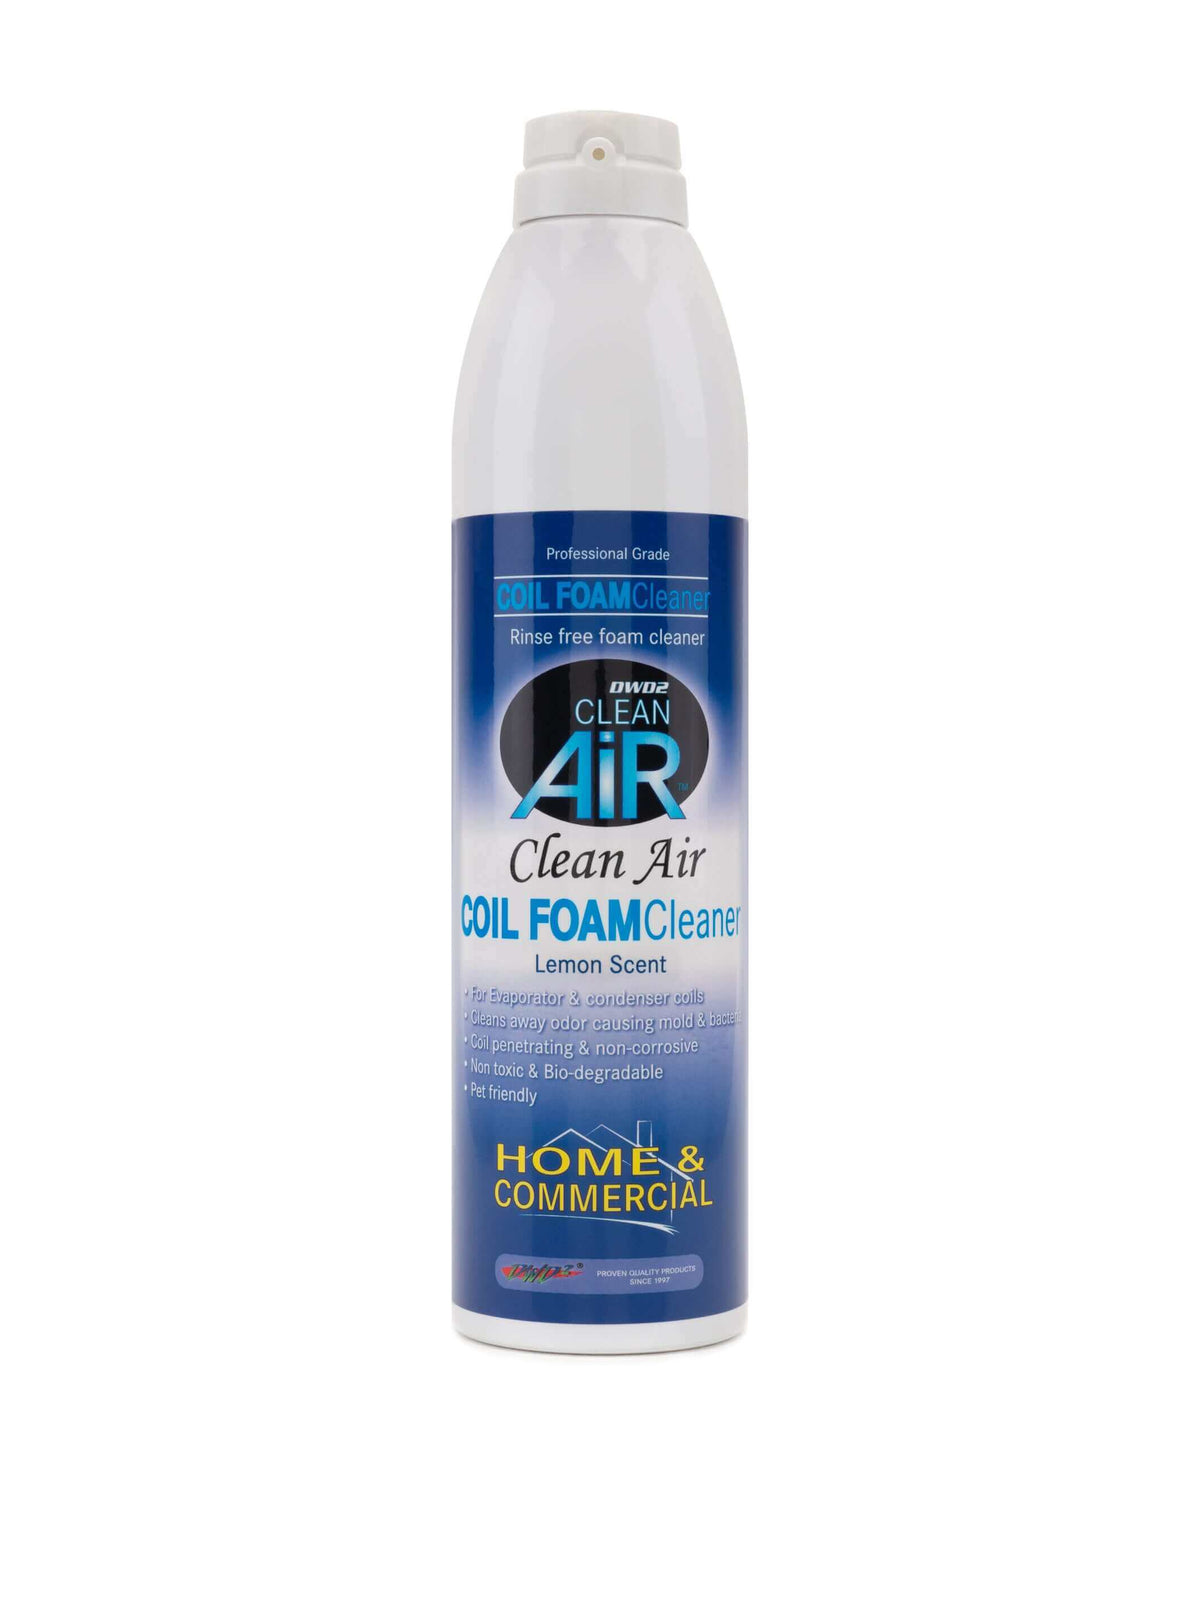 Mad Foam AC Coil Cleaner Foaming for AC Heating & Refrigeration